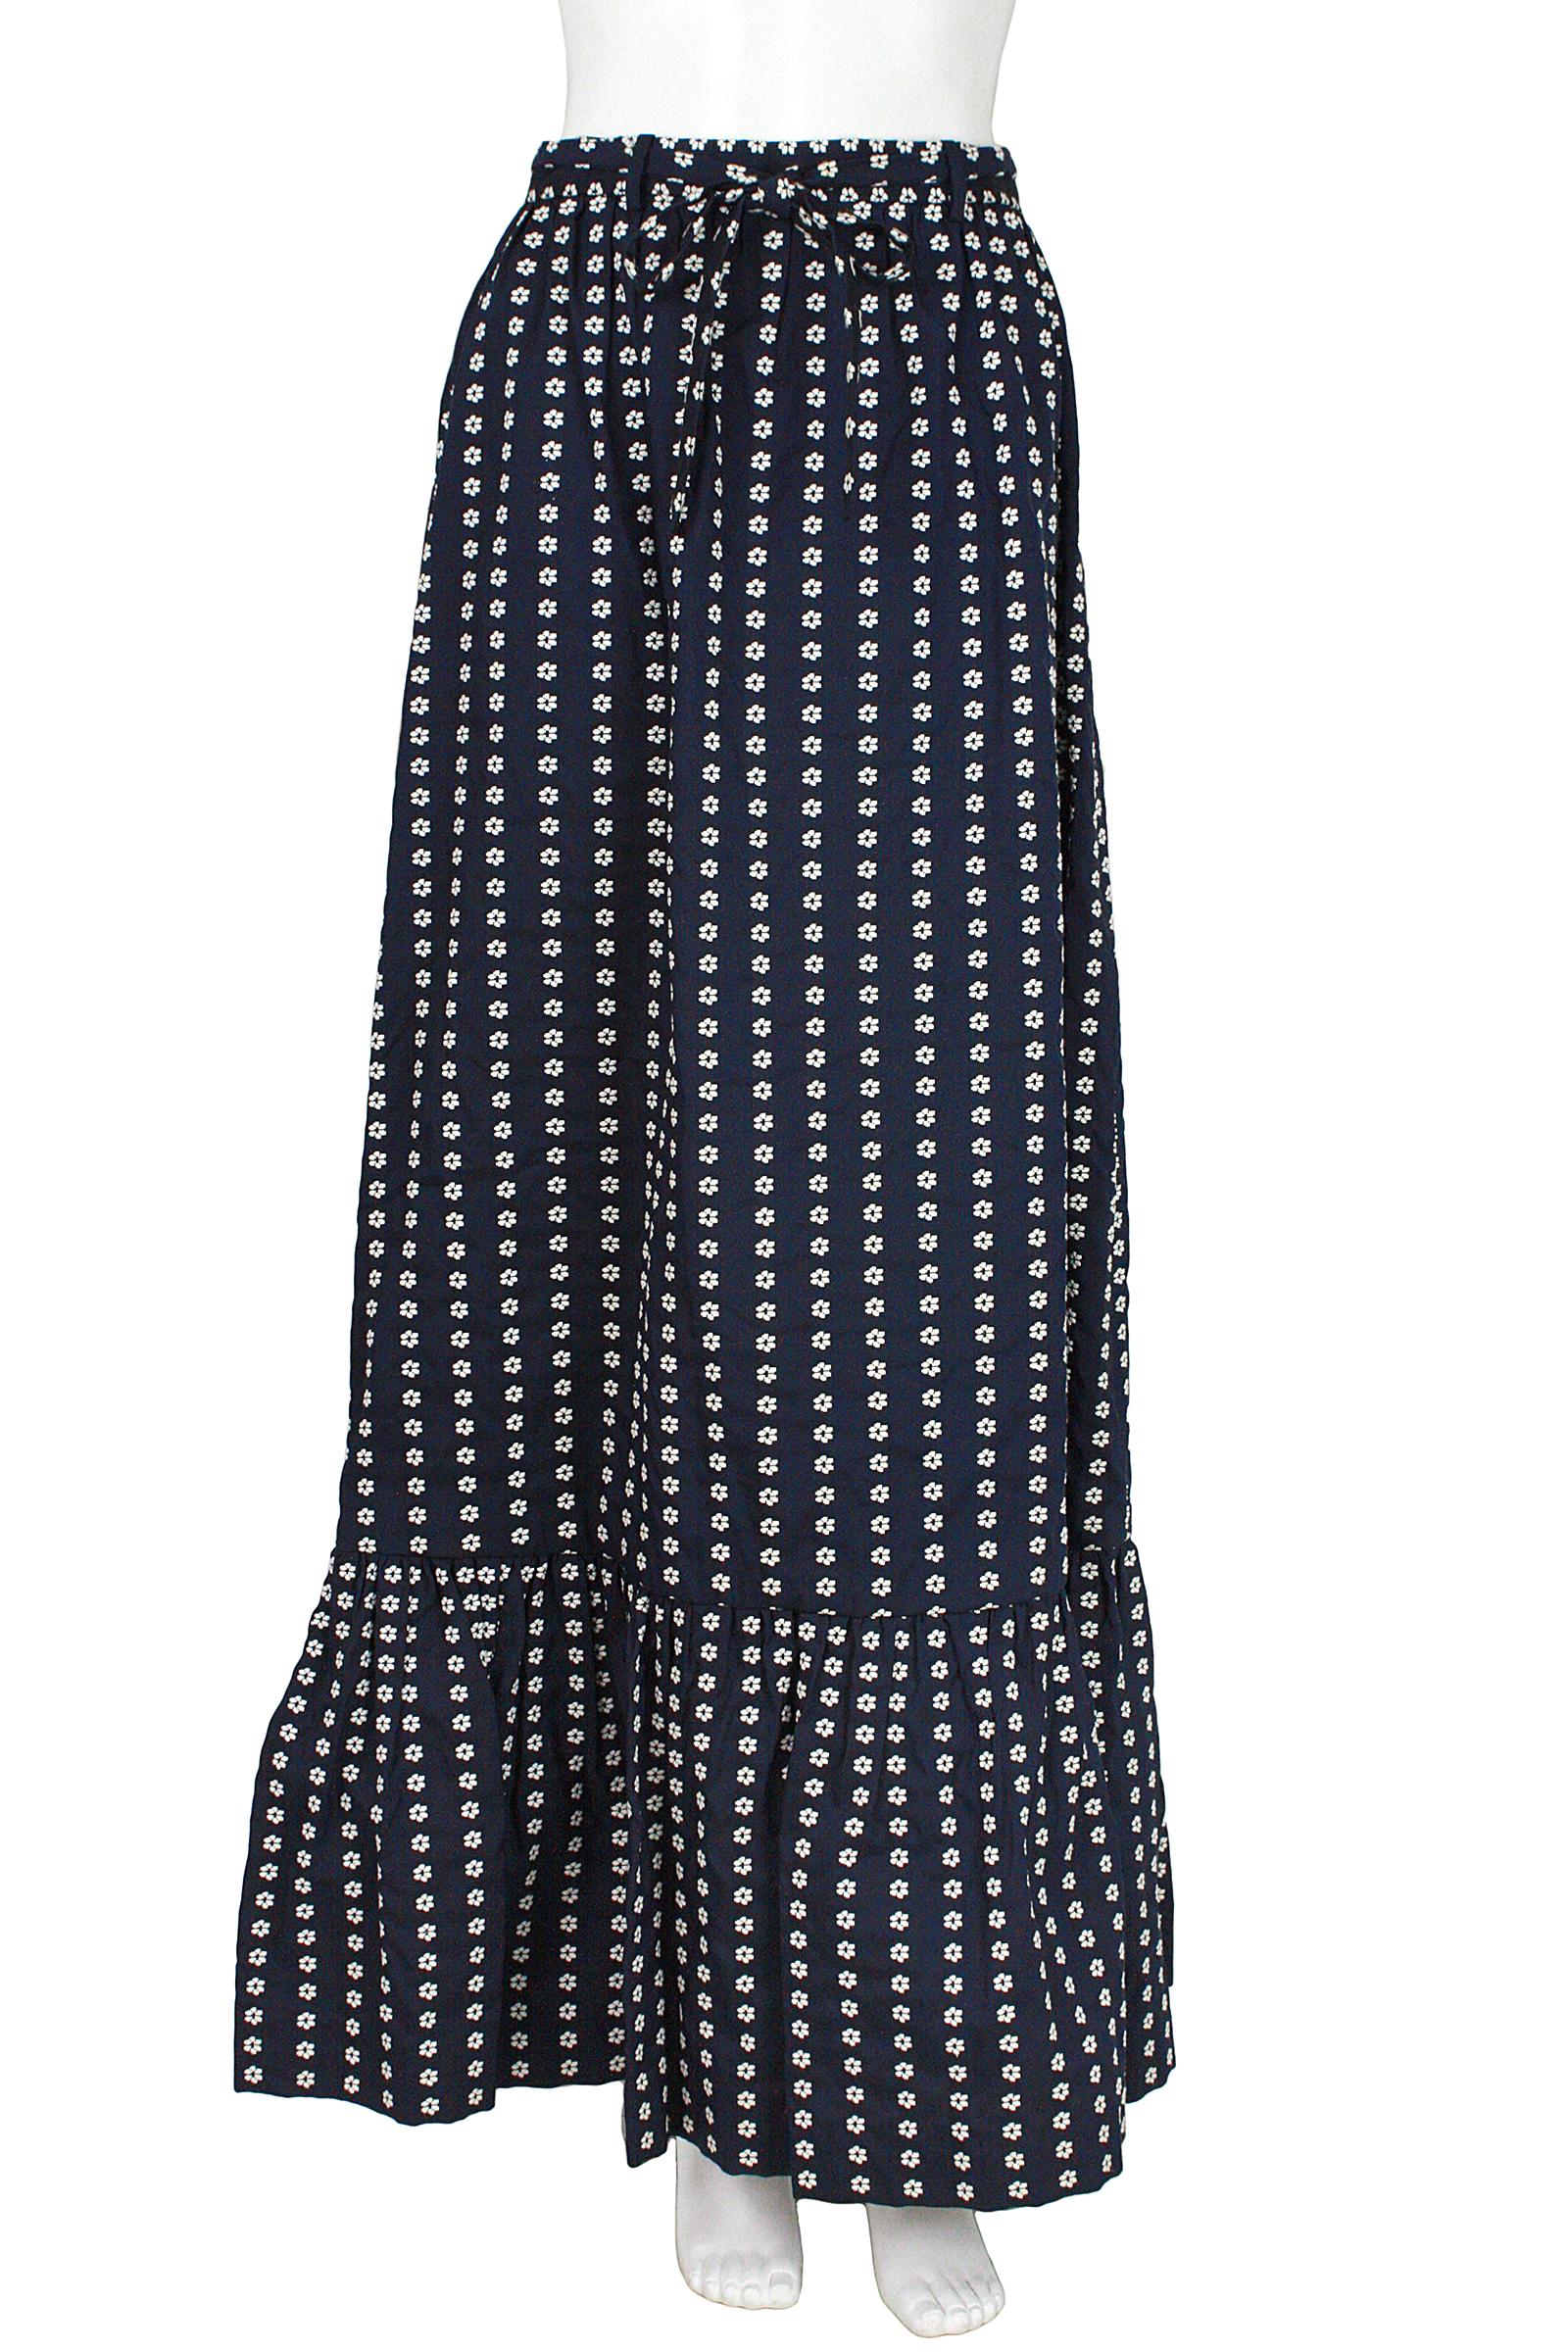 Valentino maxi skirt 
Rayon navy with embroidered white flowers 
Flounced panel at hem 
Tie rayon belt 
Back zipper and hook and eye 